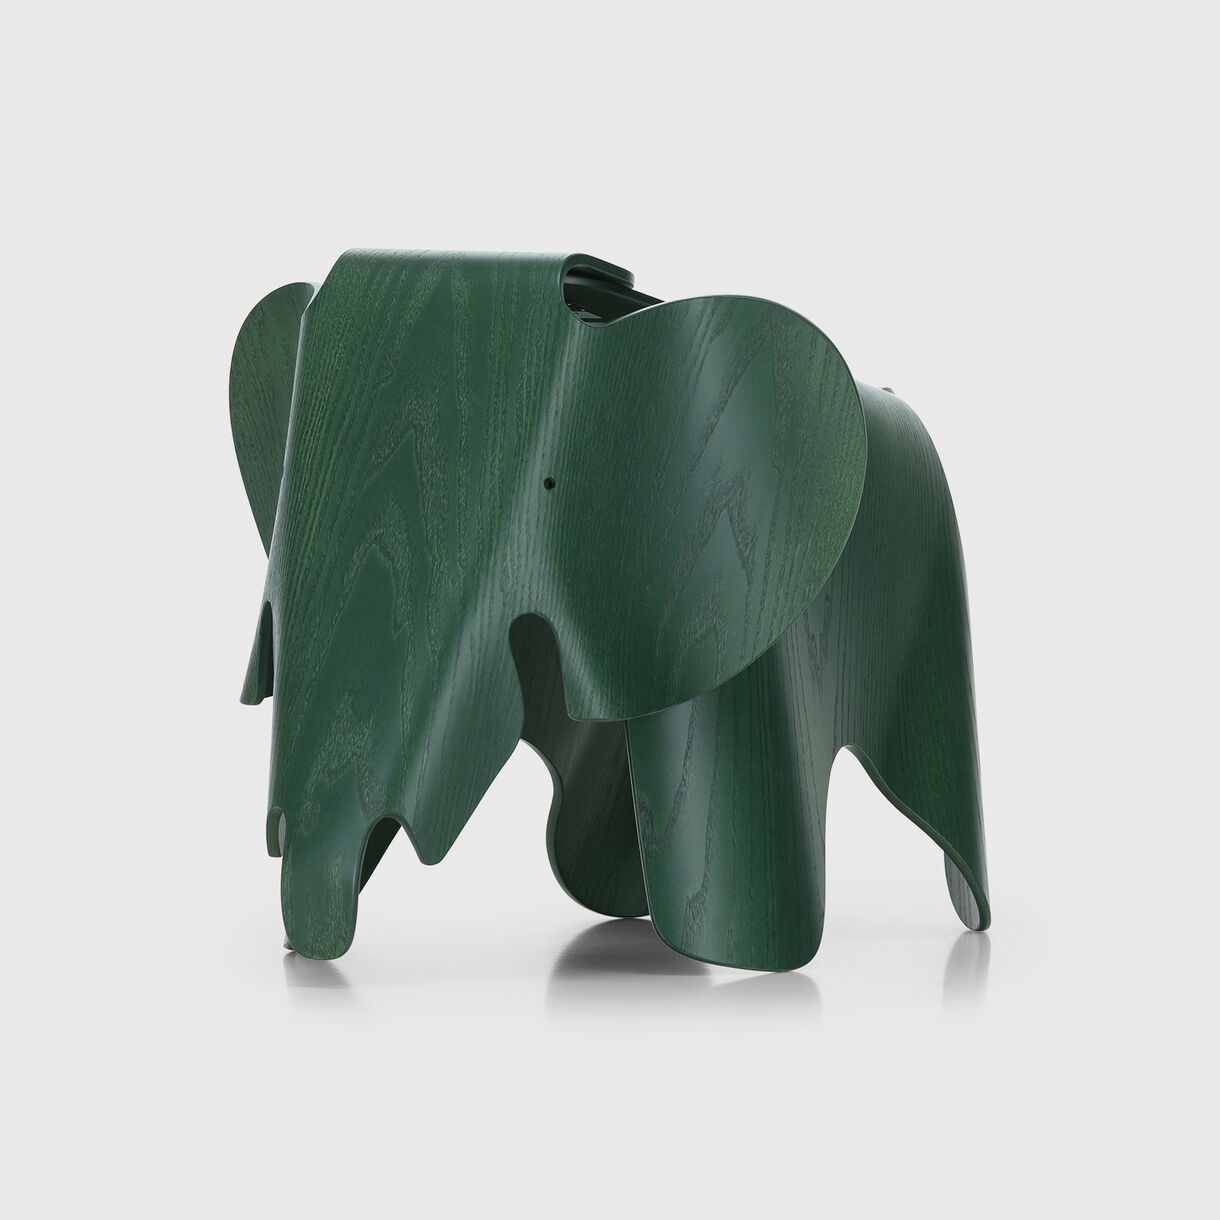 Eames Elephant (Plywood), Special Collection